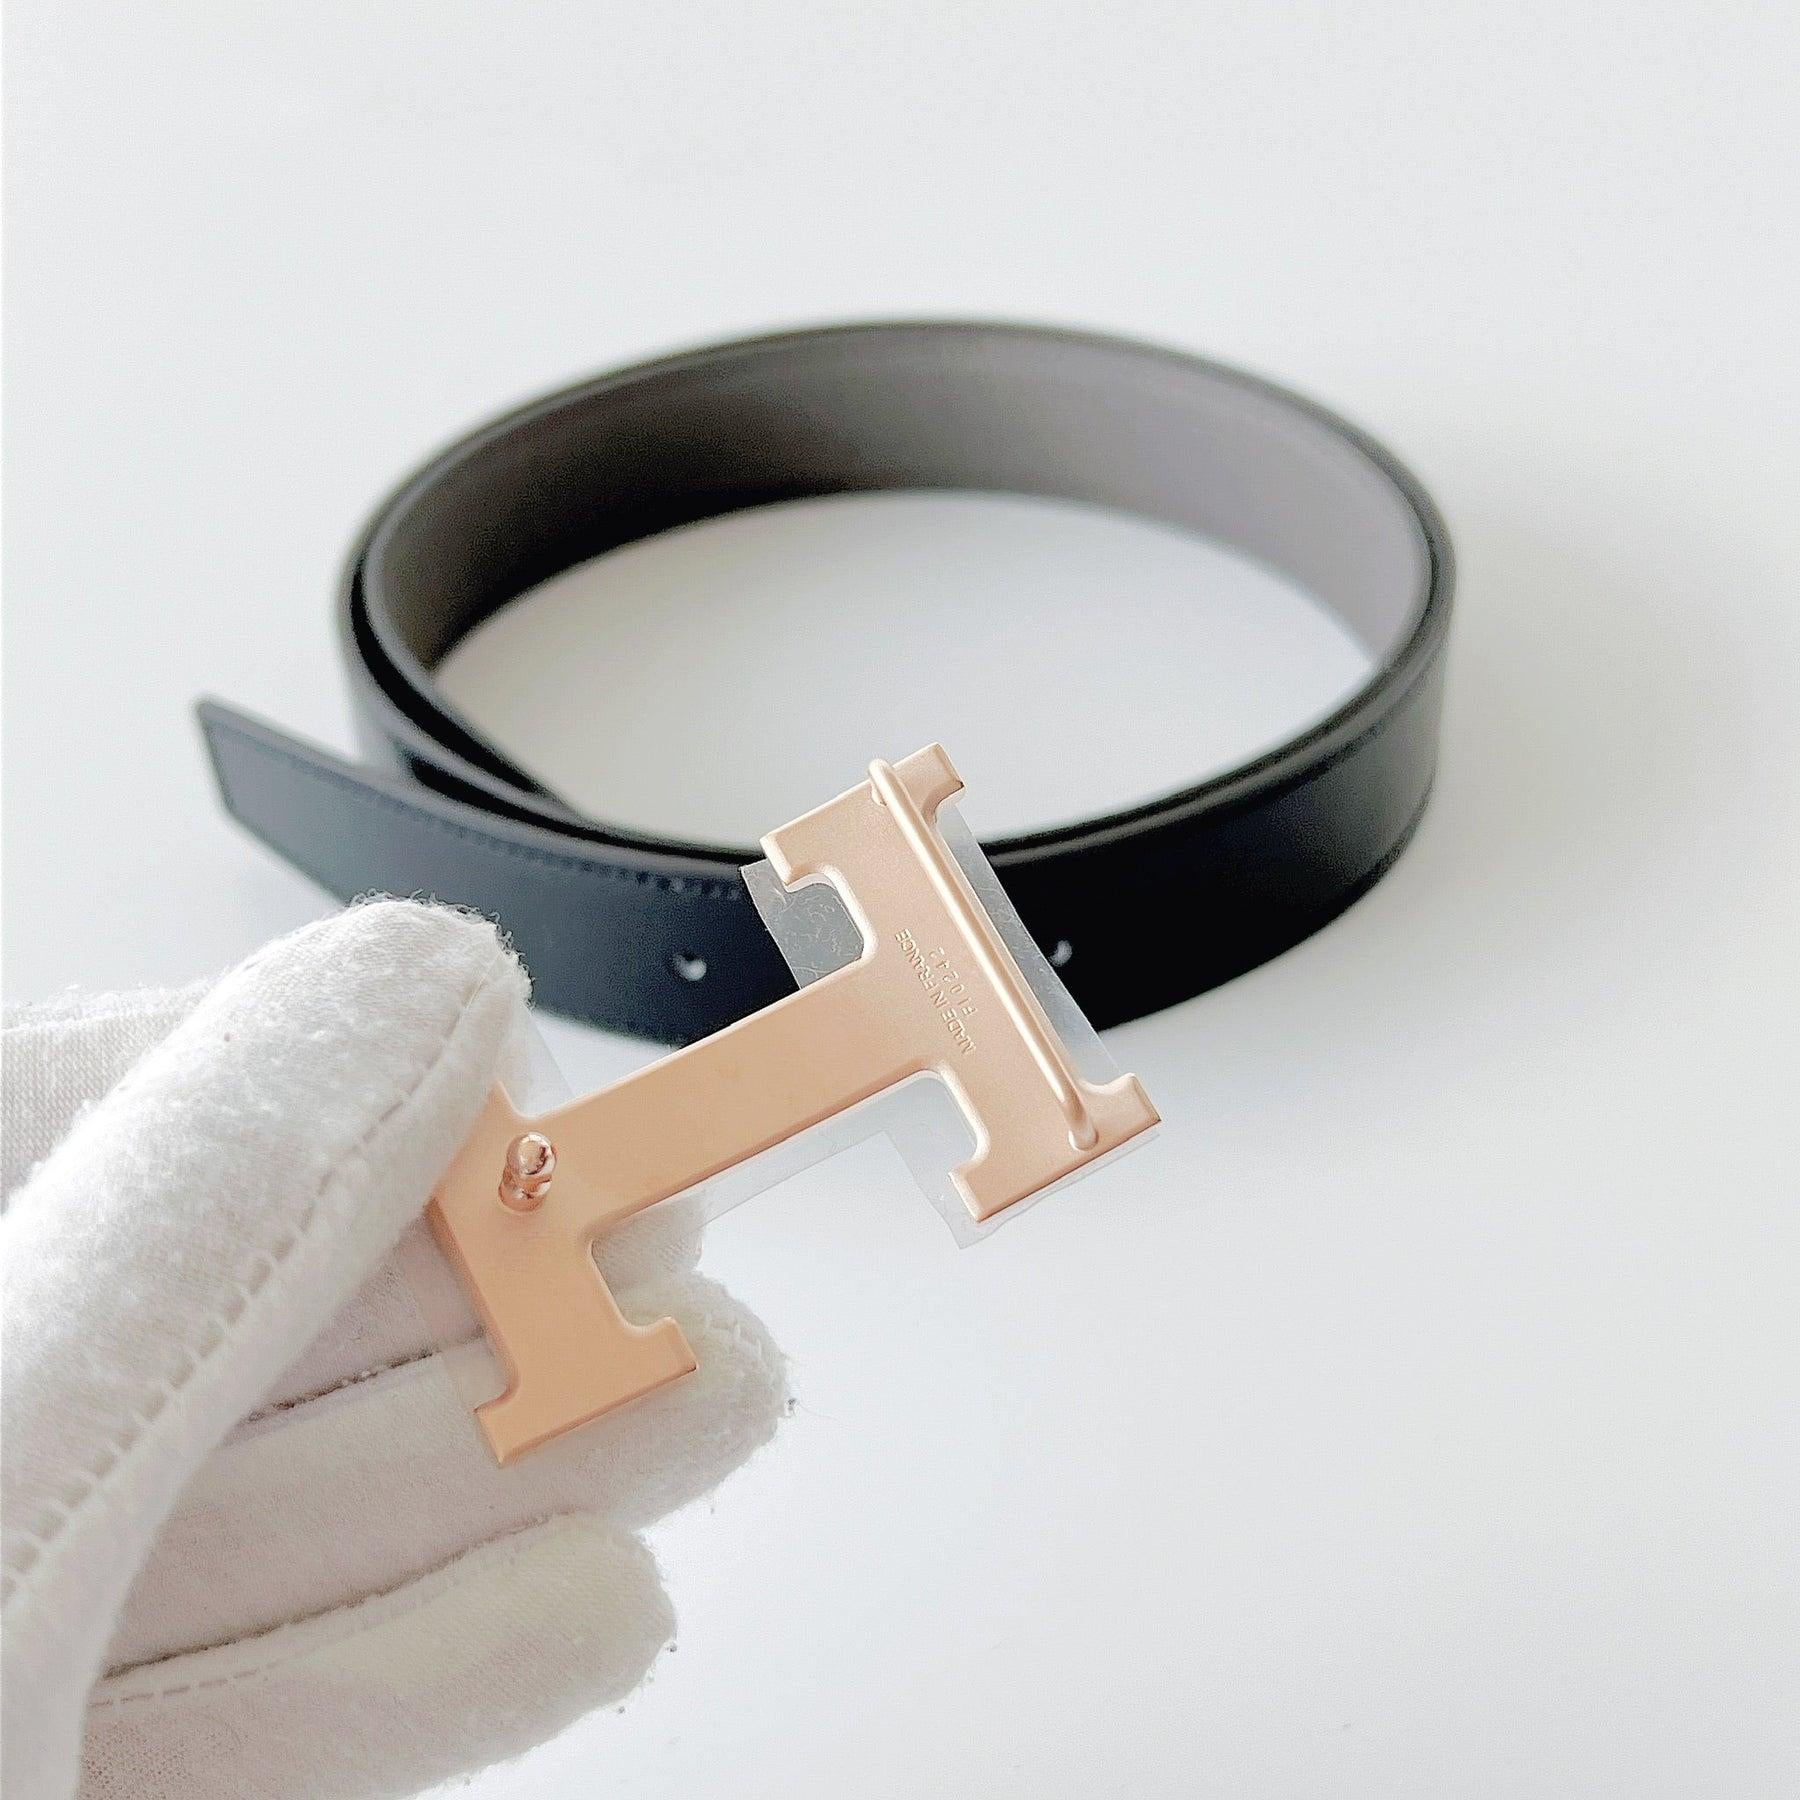 Shop this Men's Constance 'H' Reversible Belt in Black & Etain. The belt features a Rose Gold Permabrass Buckle that is changeable. The reversible leather strap, allows you to match the belt to multiple outfits. The leather strap is in box calfskin